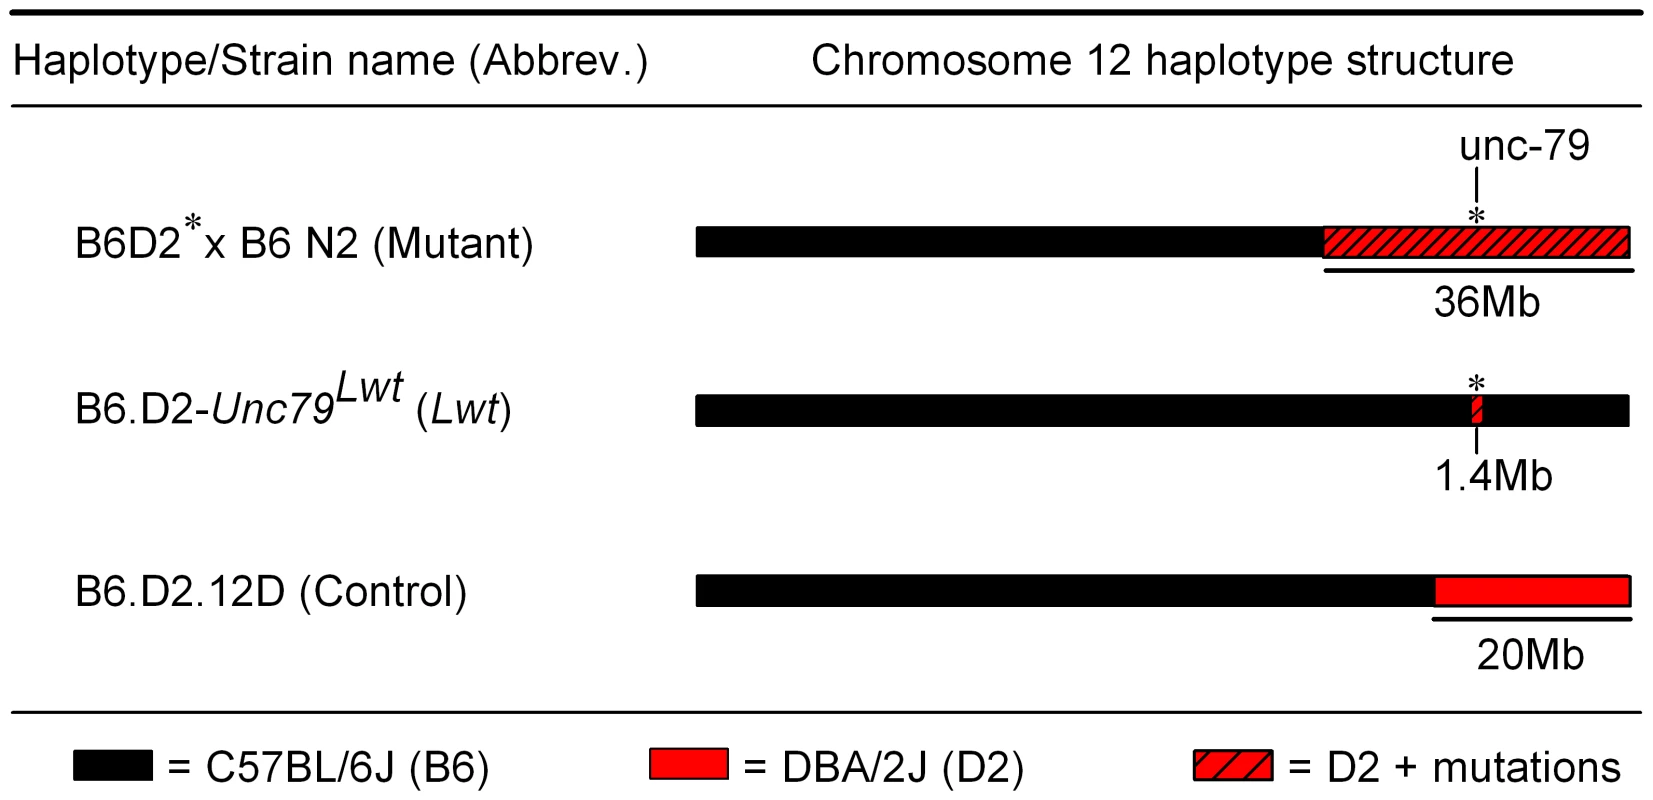 Chromosome 12 haplotype structure of animals used for behavioral testing.